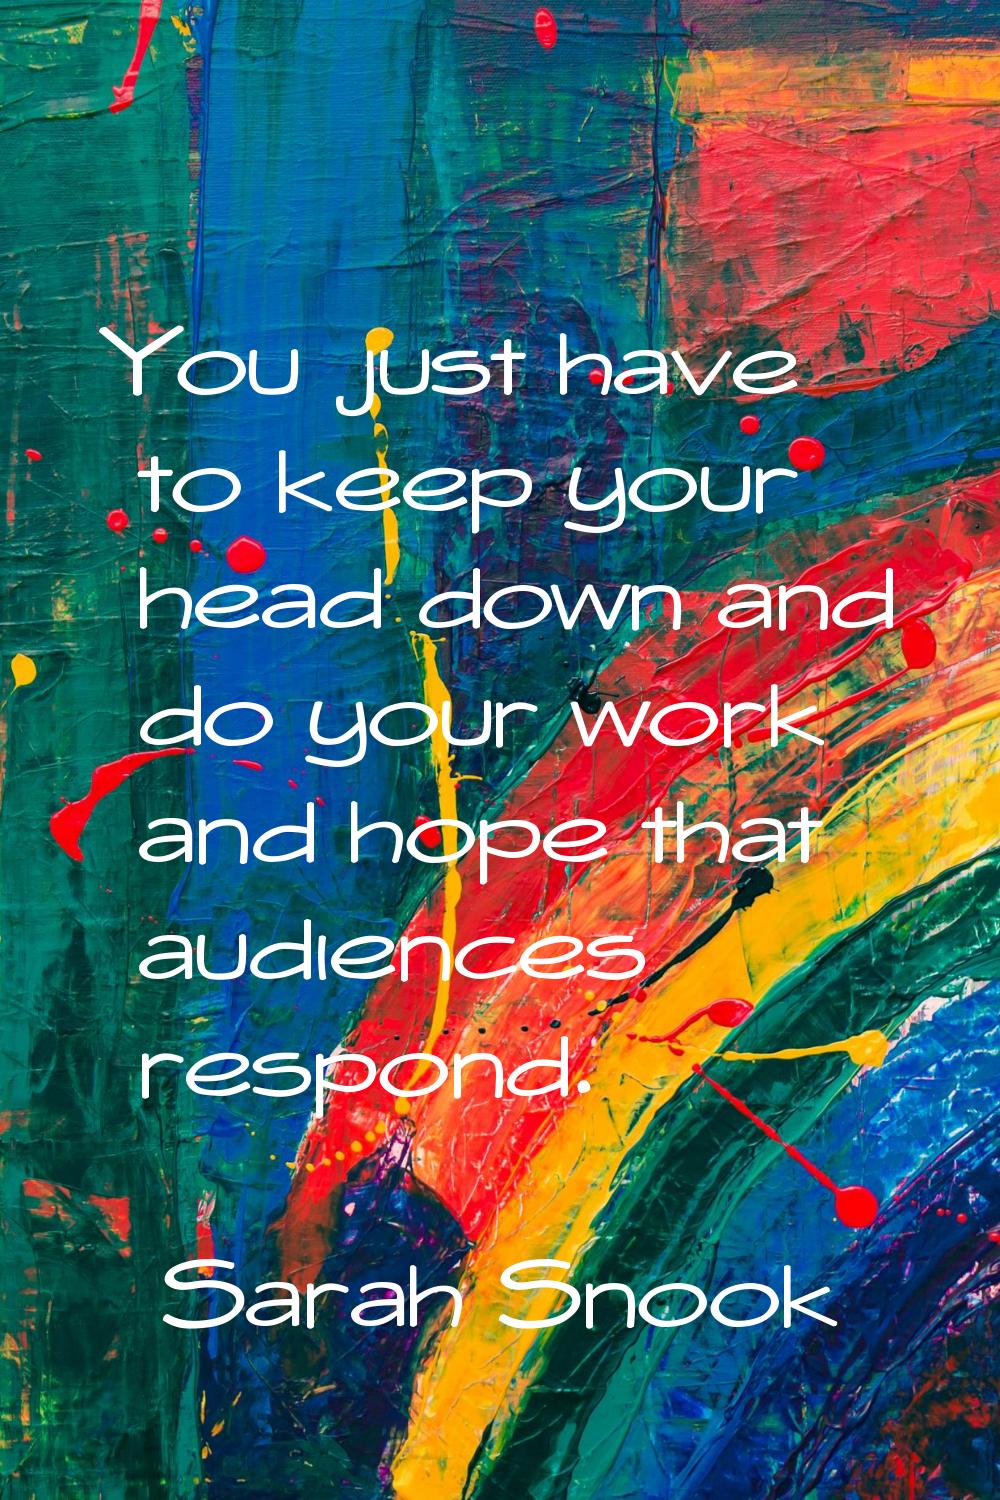 You just have to keep your head down and do your work and hope that audiences respond.